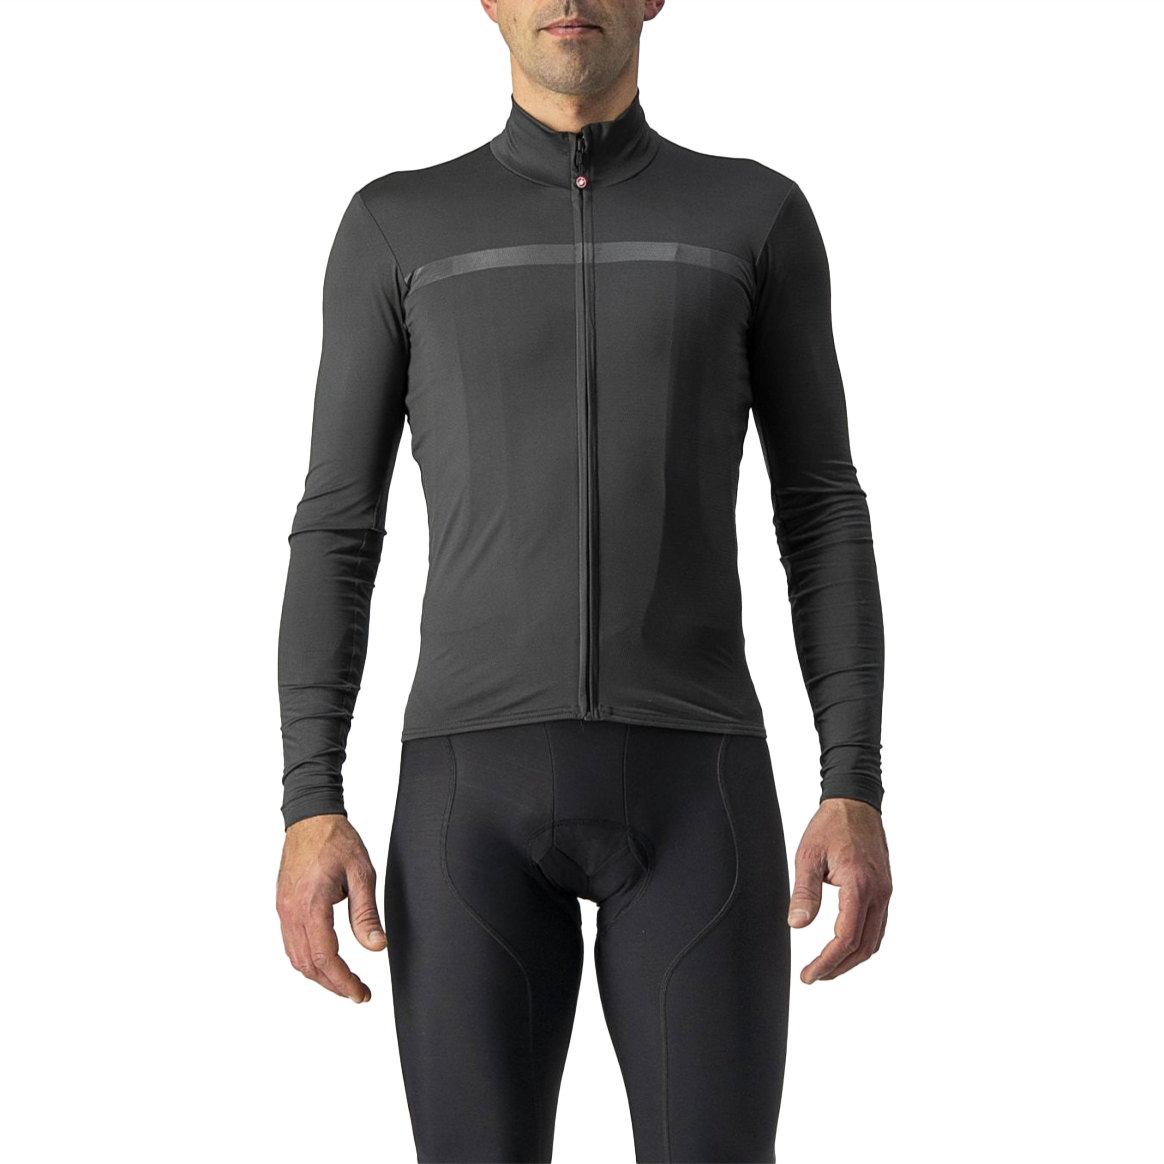 Men's Pro Thermal Mid Long Sleeve Jersey alternate view